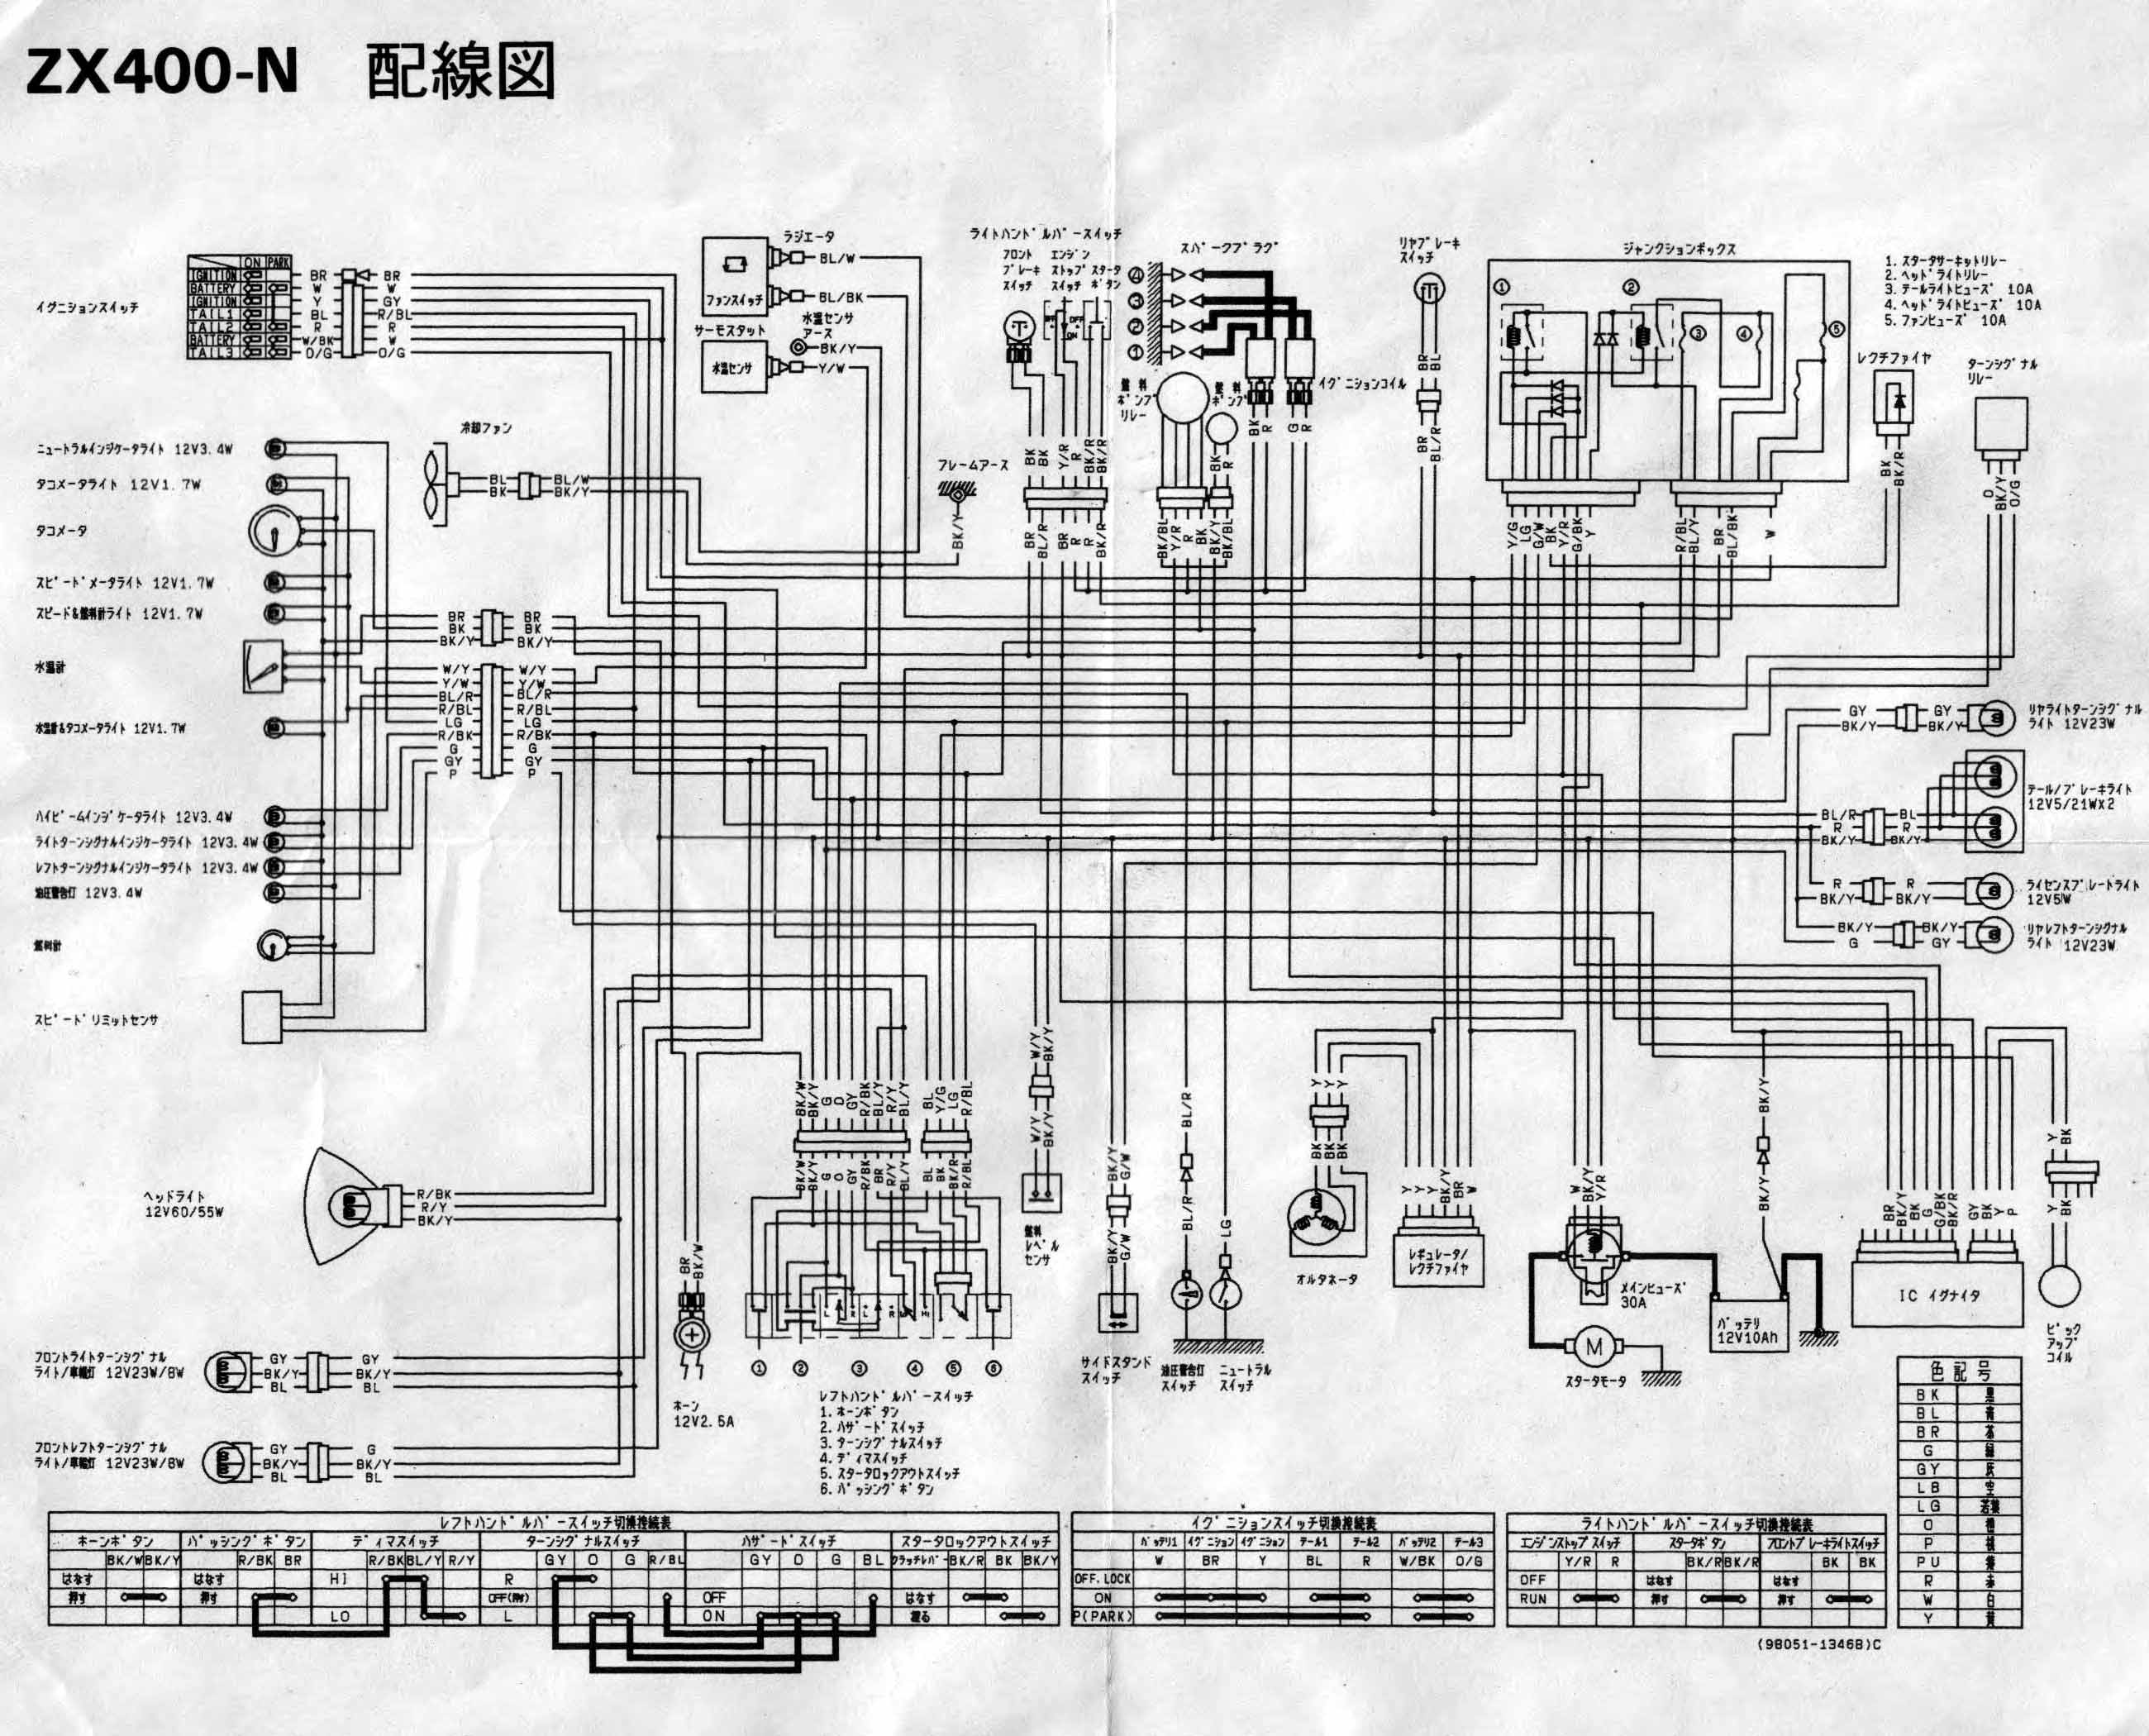 Motorcycle Wiring Diagram Pdf from www.motorcycle-manual.com